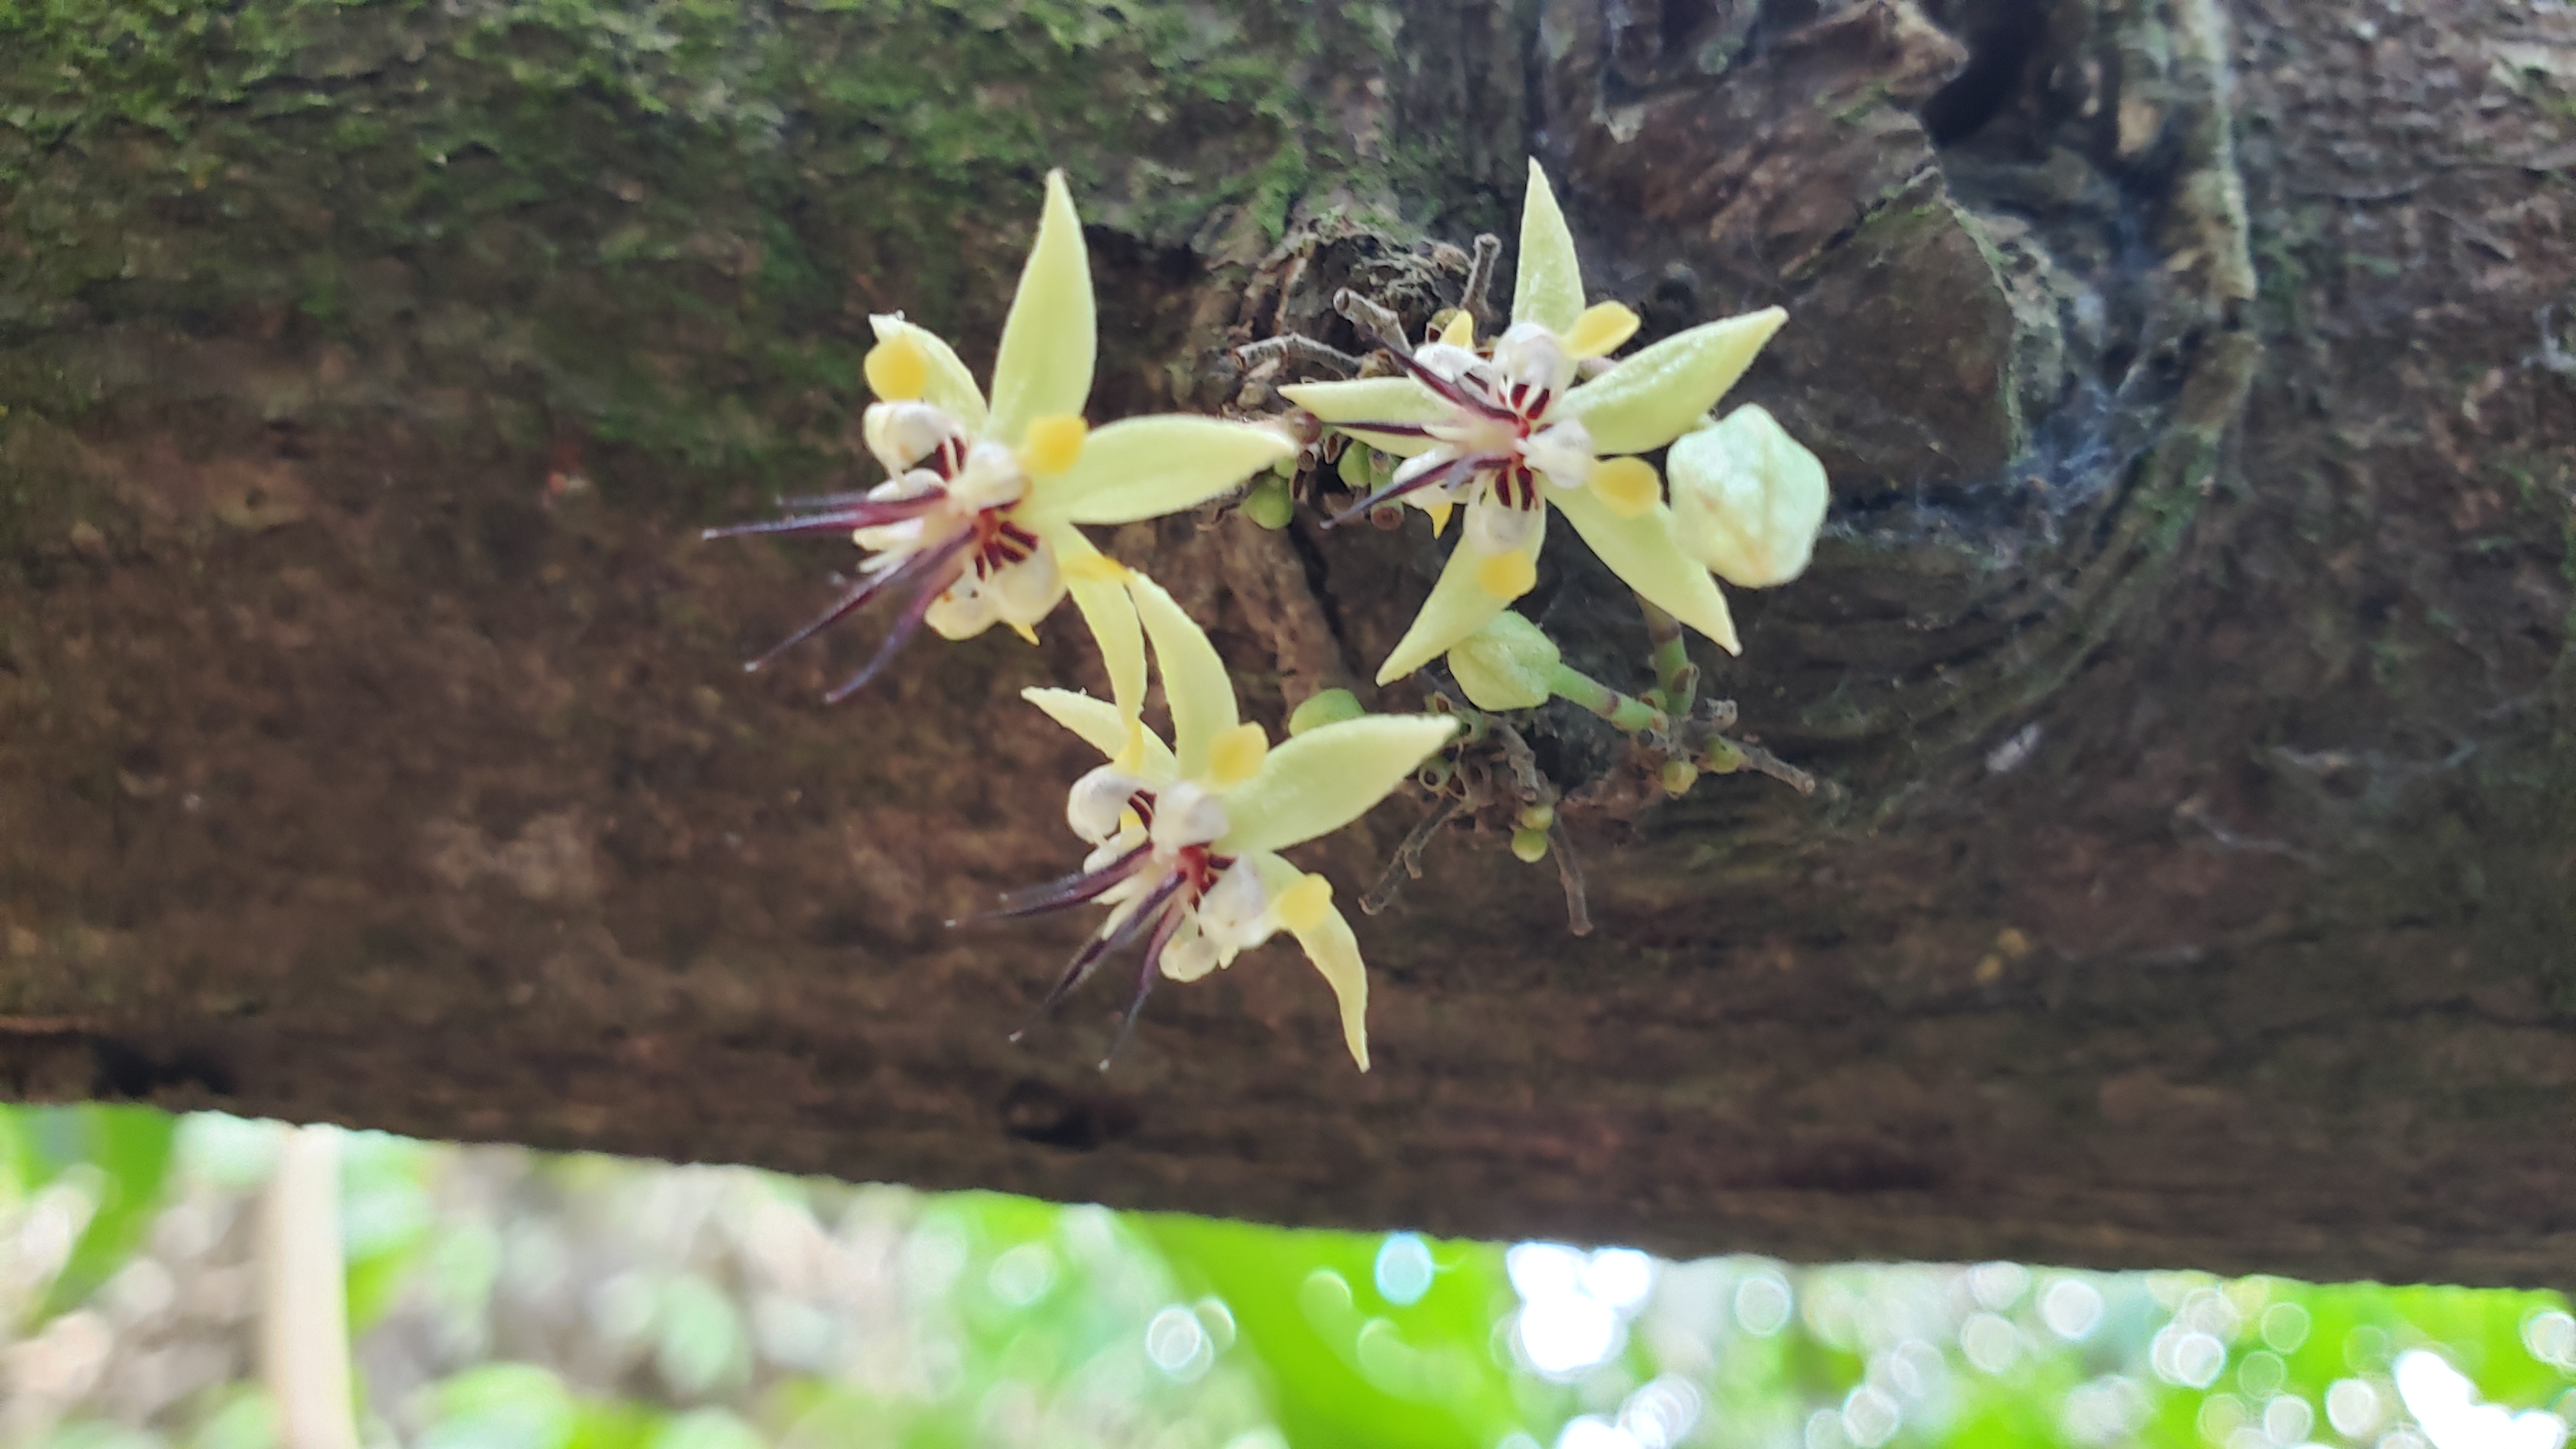 Cocoa flower on a branch of the cocoa tree